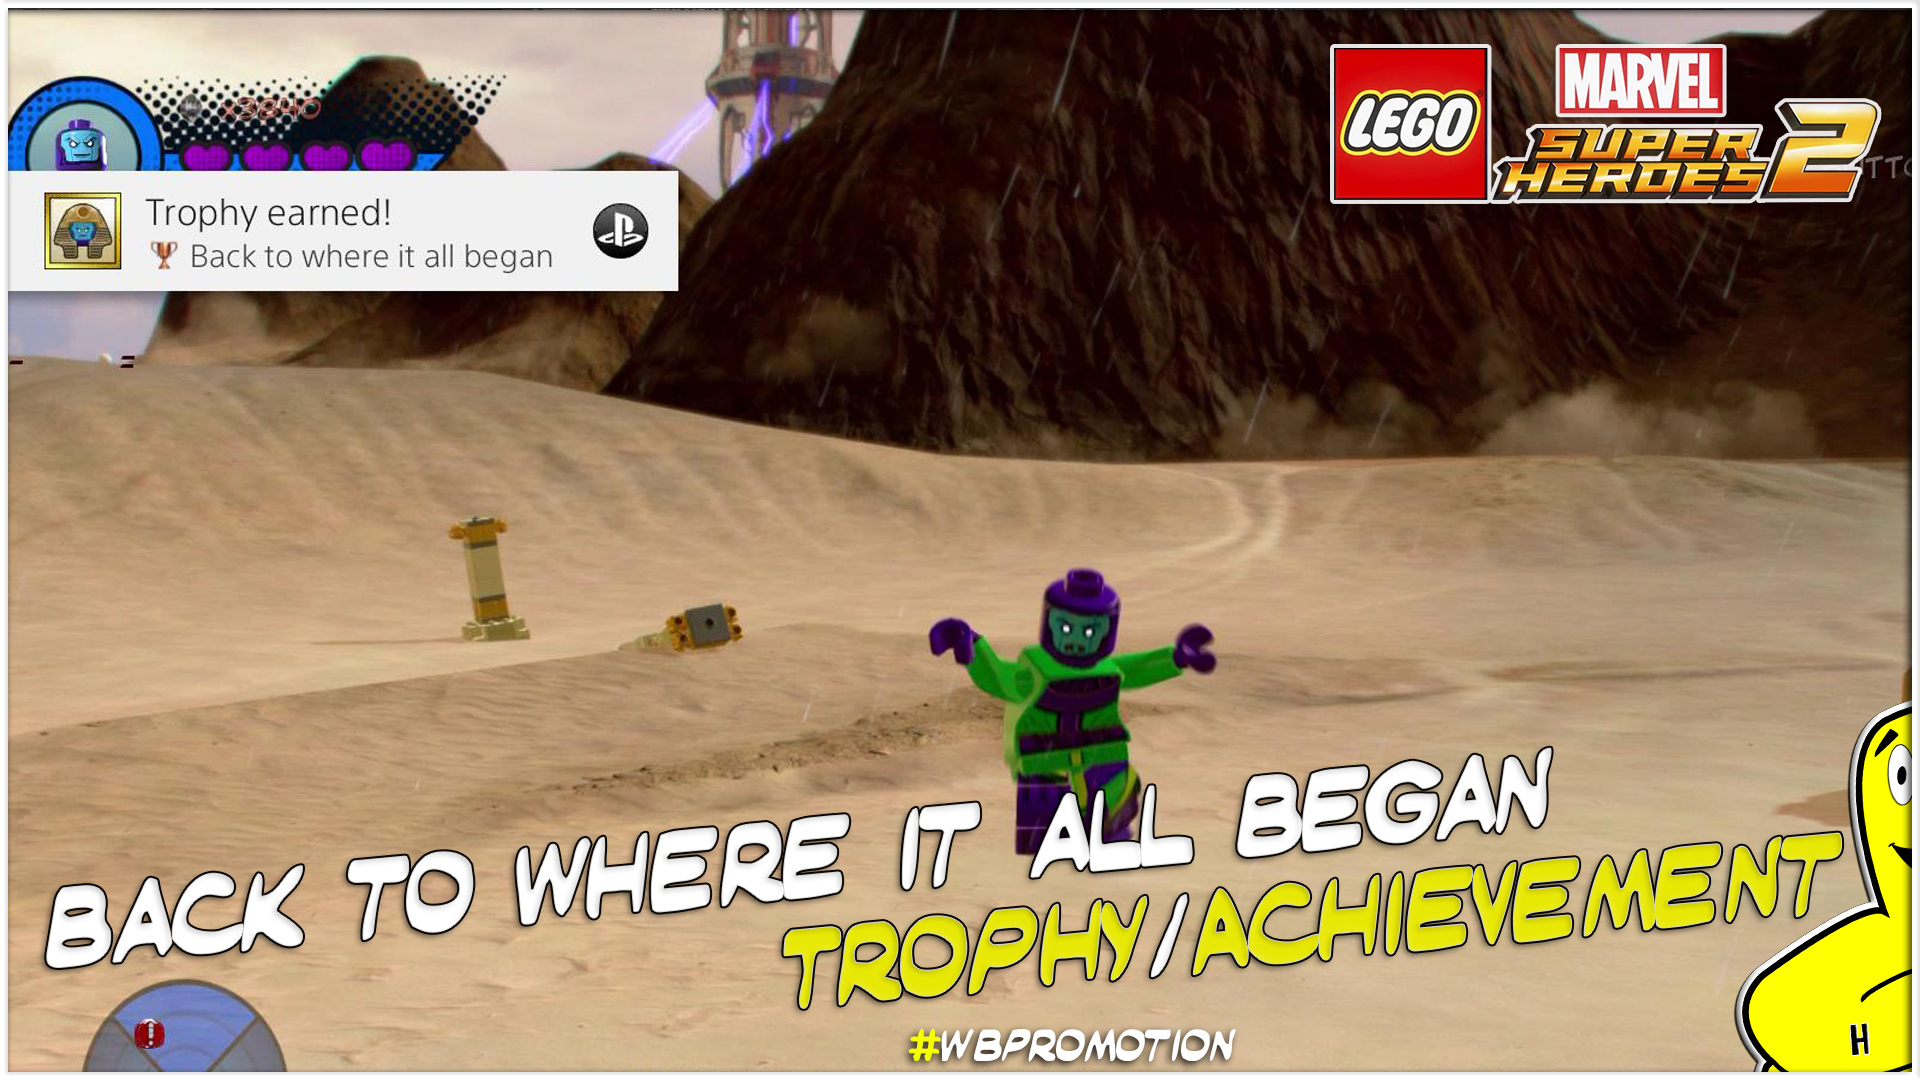 Lego Marvel Superheroes 2: Back To Where It All Began Trophy/Achievement – HTG